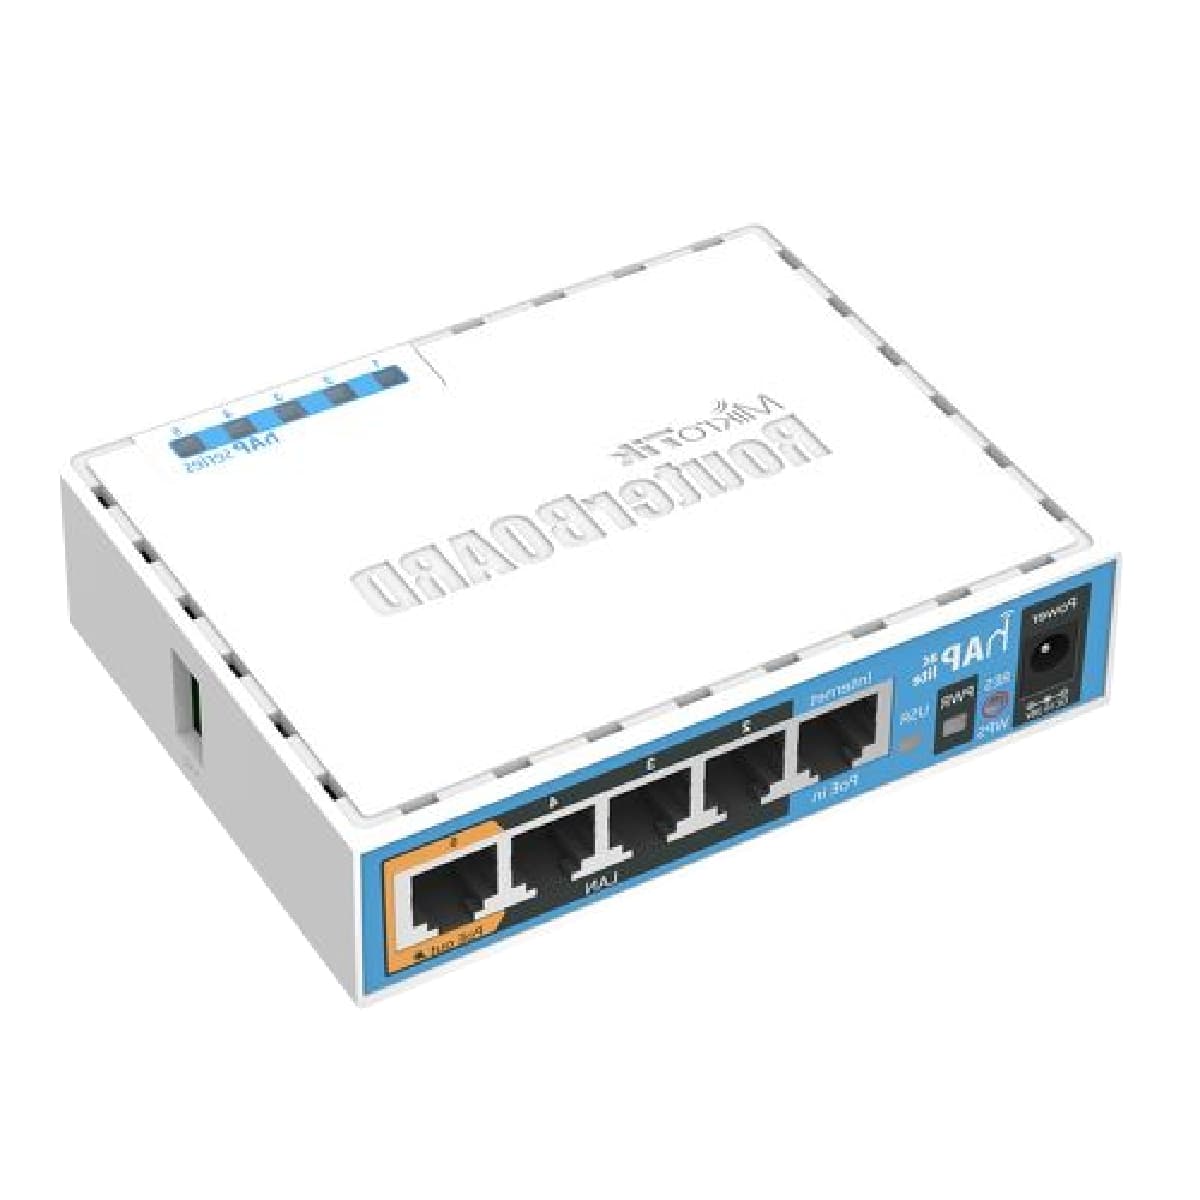 MikroTik RB952UI-5AC2ND WiFi 5 Router